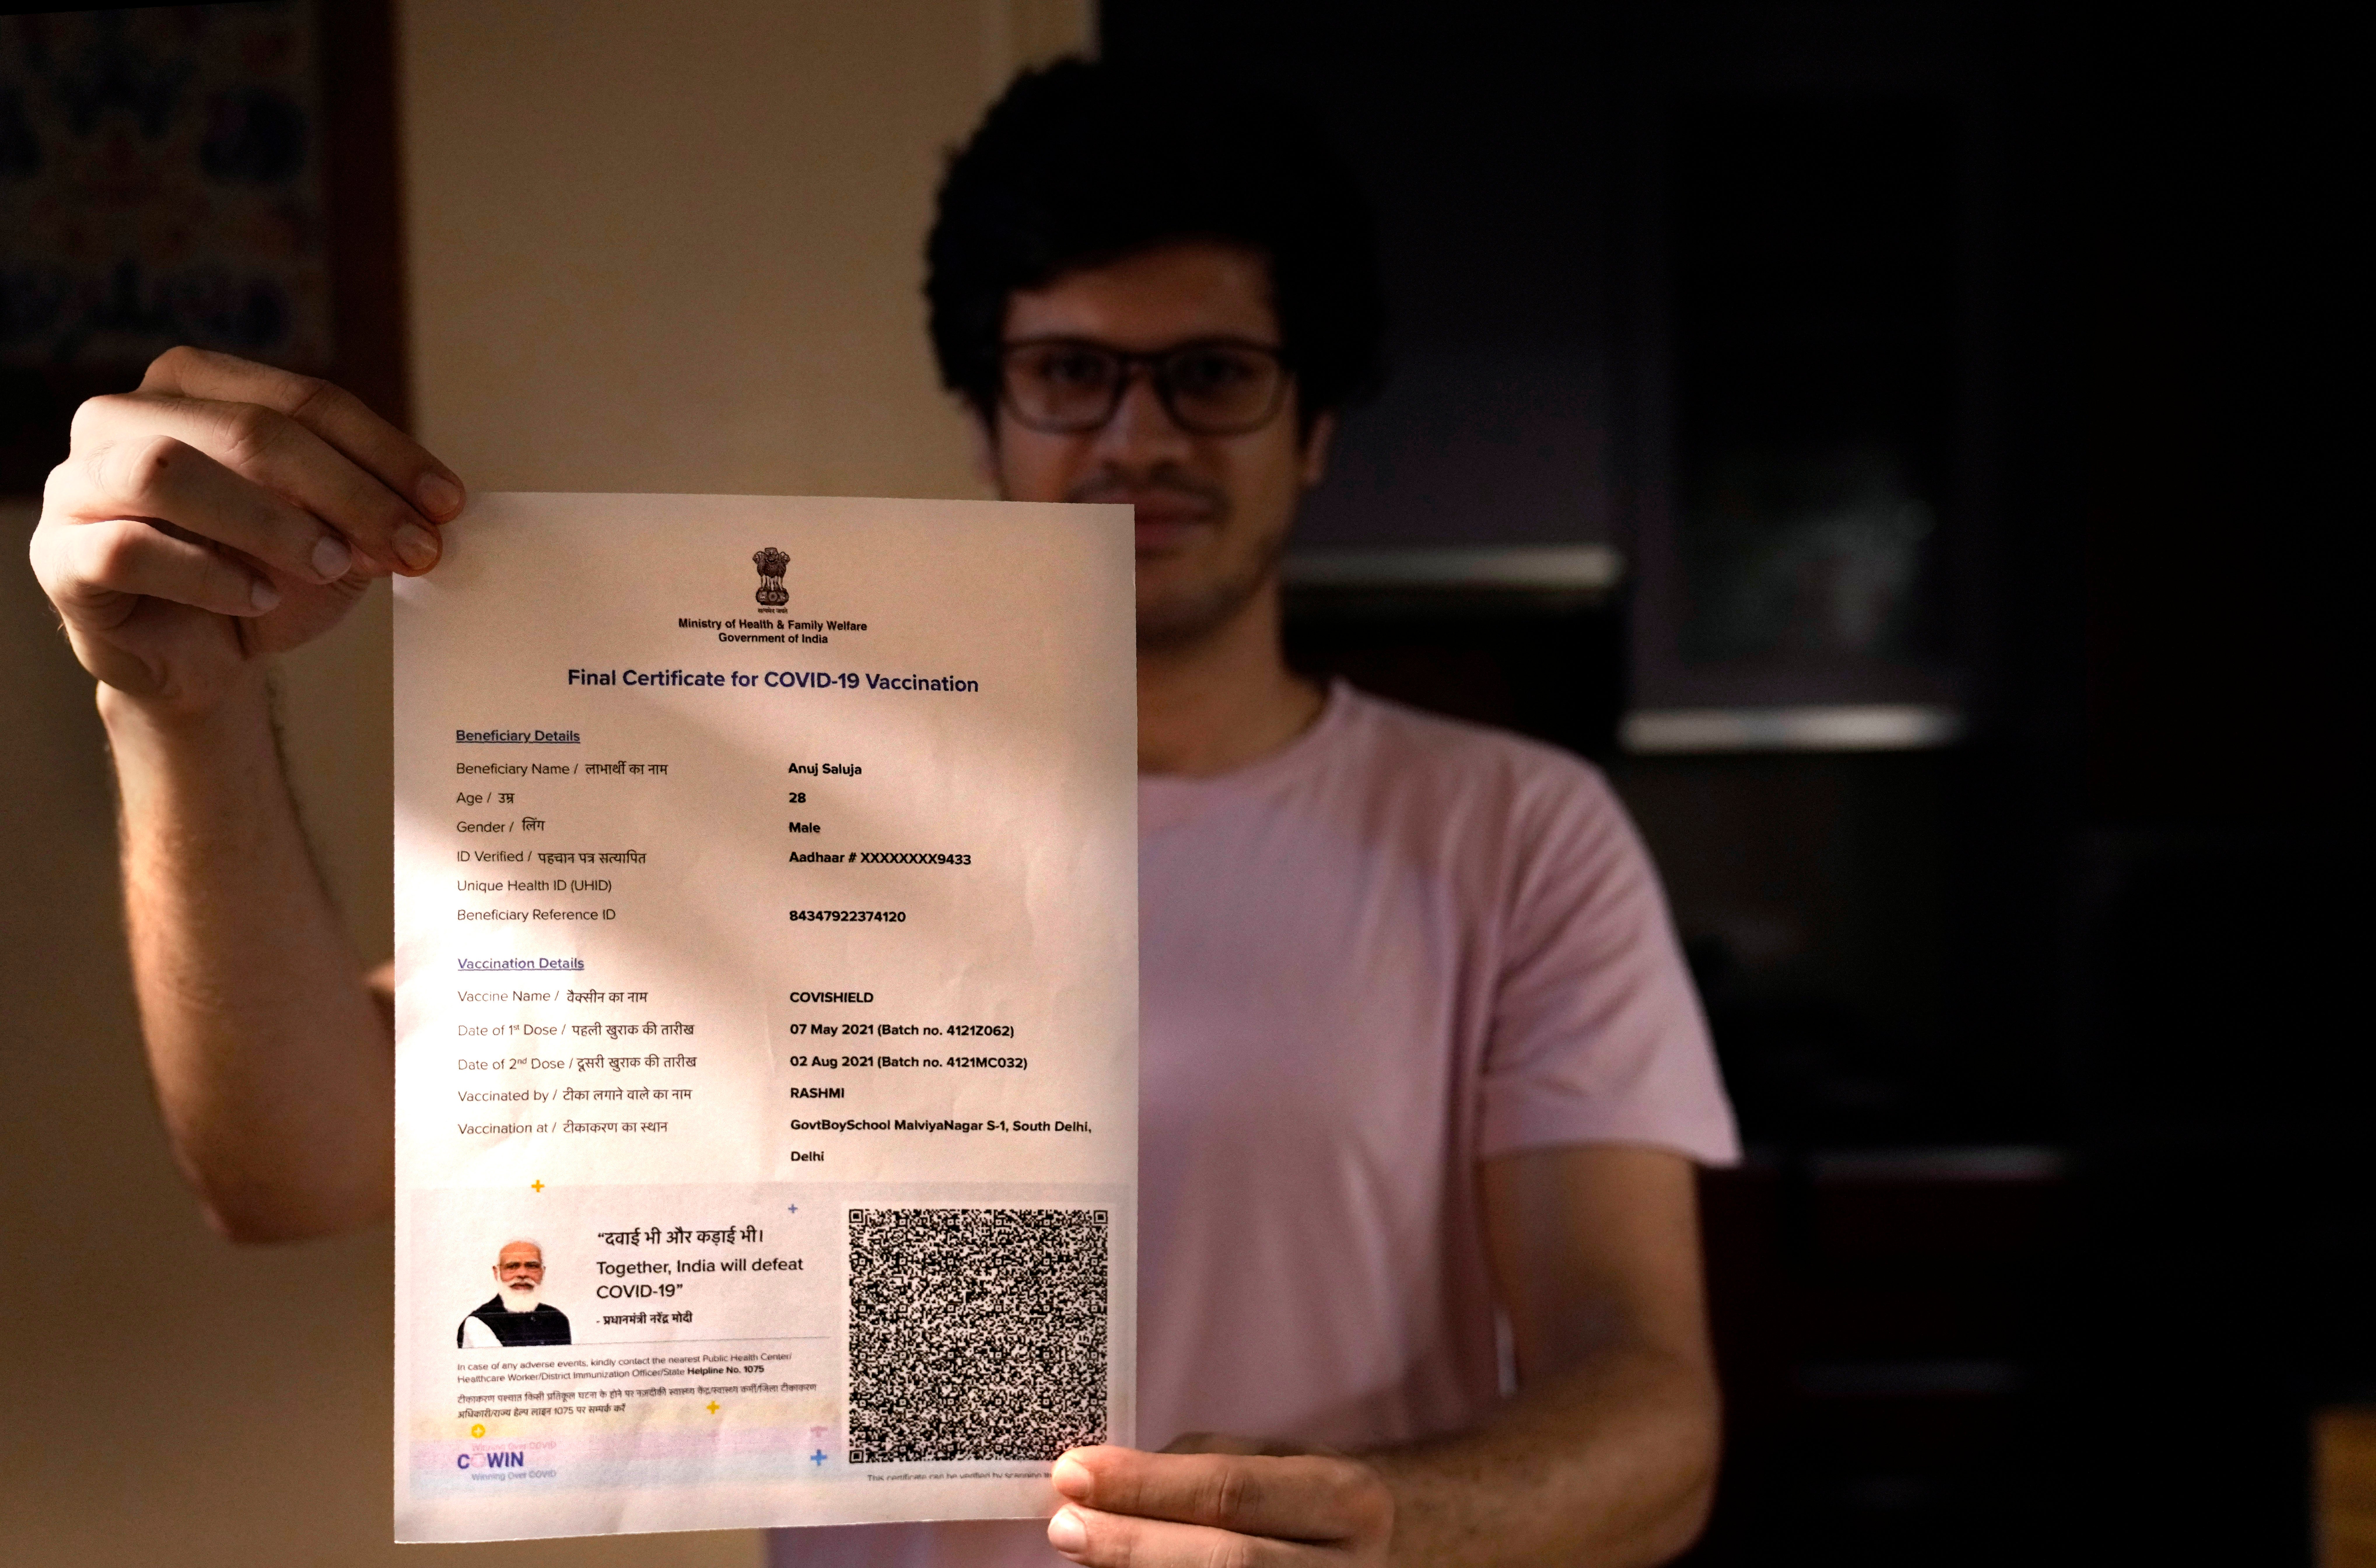 File: A court in southern India heard a plea challenging the presence of a photo of India’s prime minister Narendra Modi on vaccine certificates